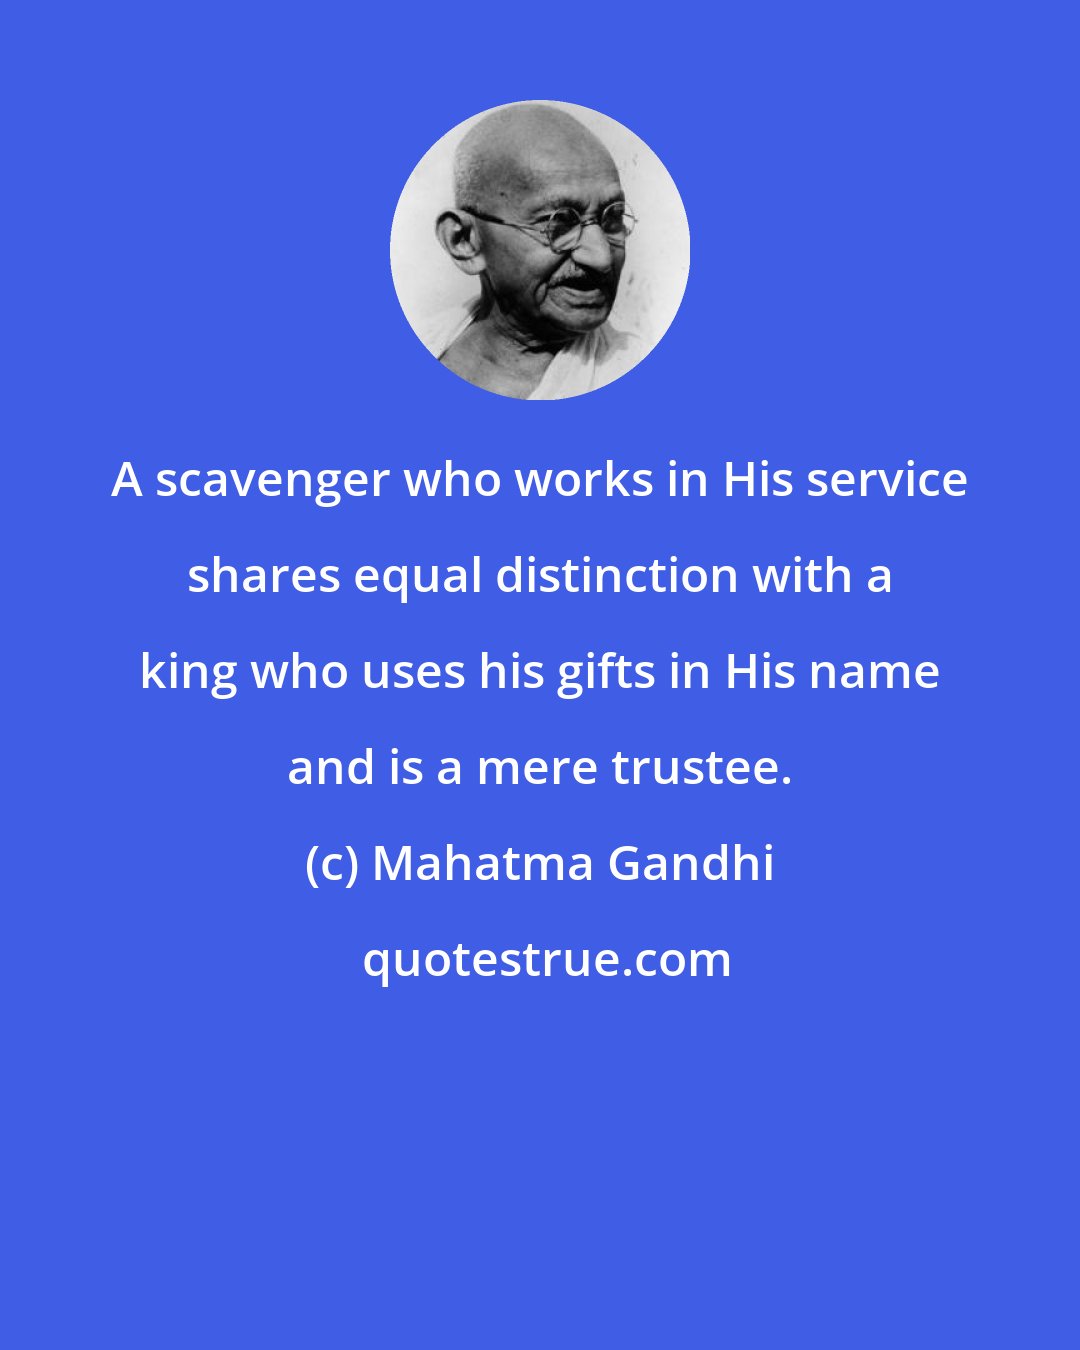 Mahatma Gandhi: A scavenger who works in His service shares equal distinction with a king who uses his gifts in His name and is a mere trustee.